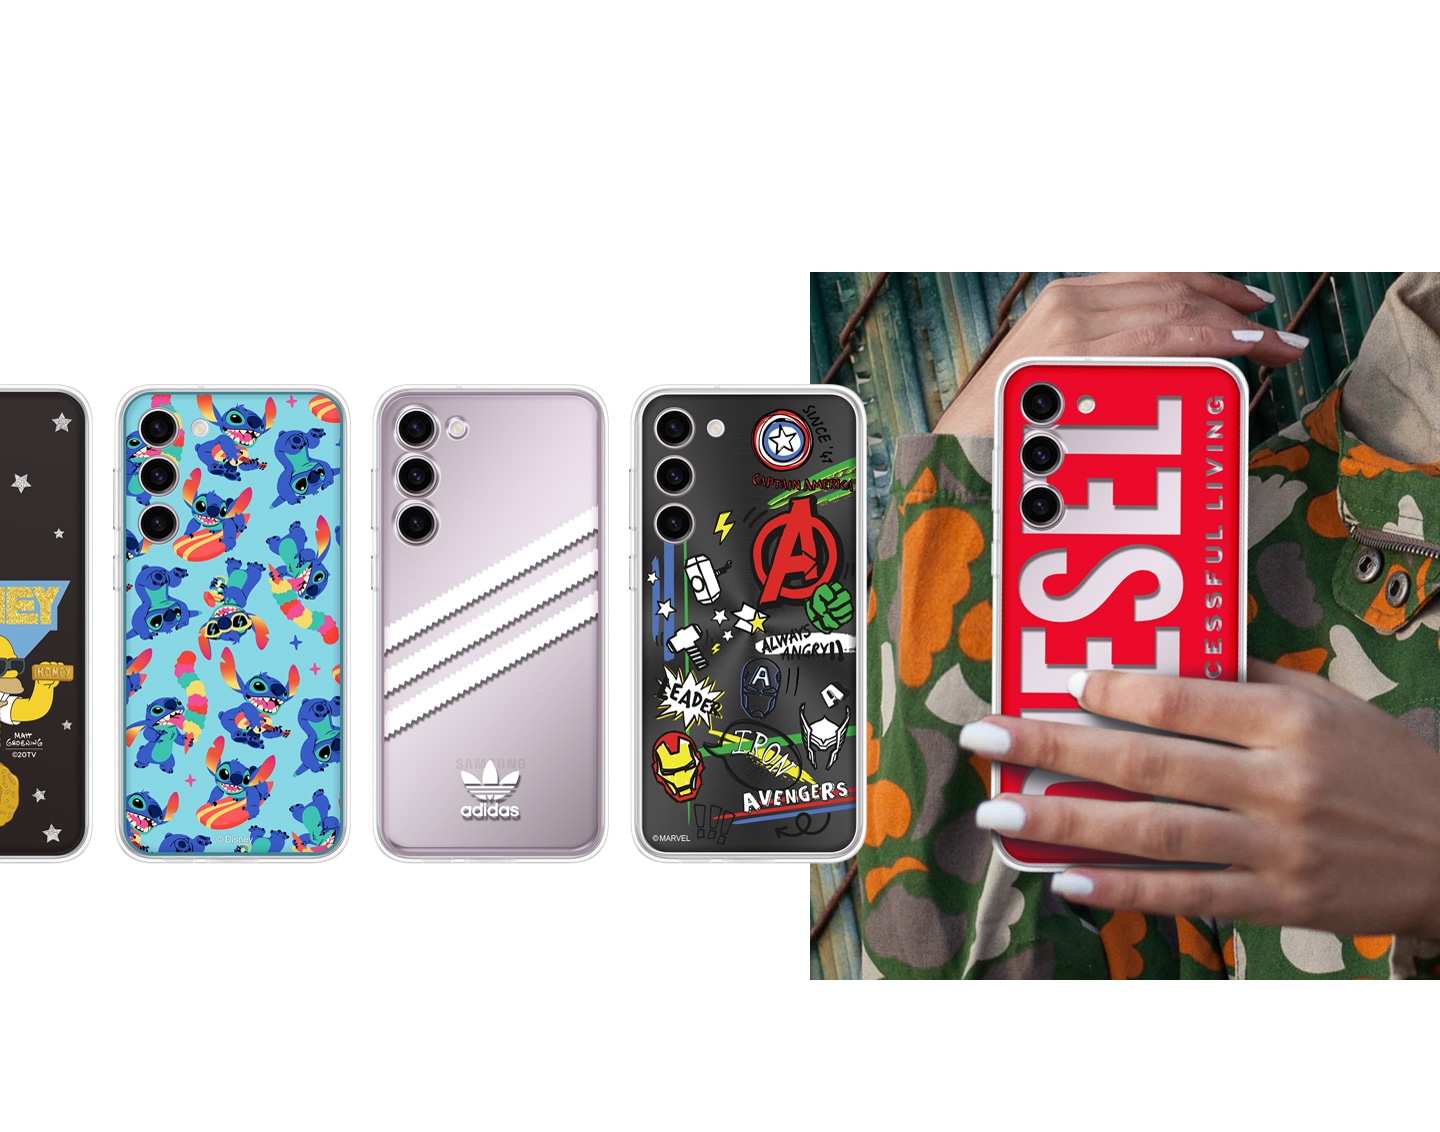 View of selection of backplates with various designs in partnership with other brands like Adidas and Diesel.